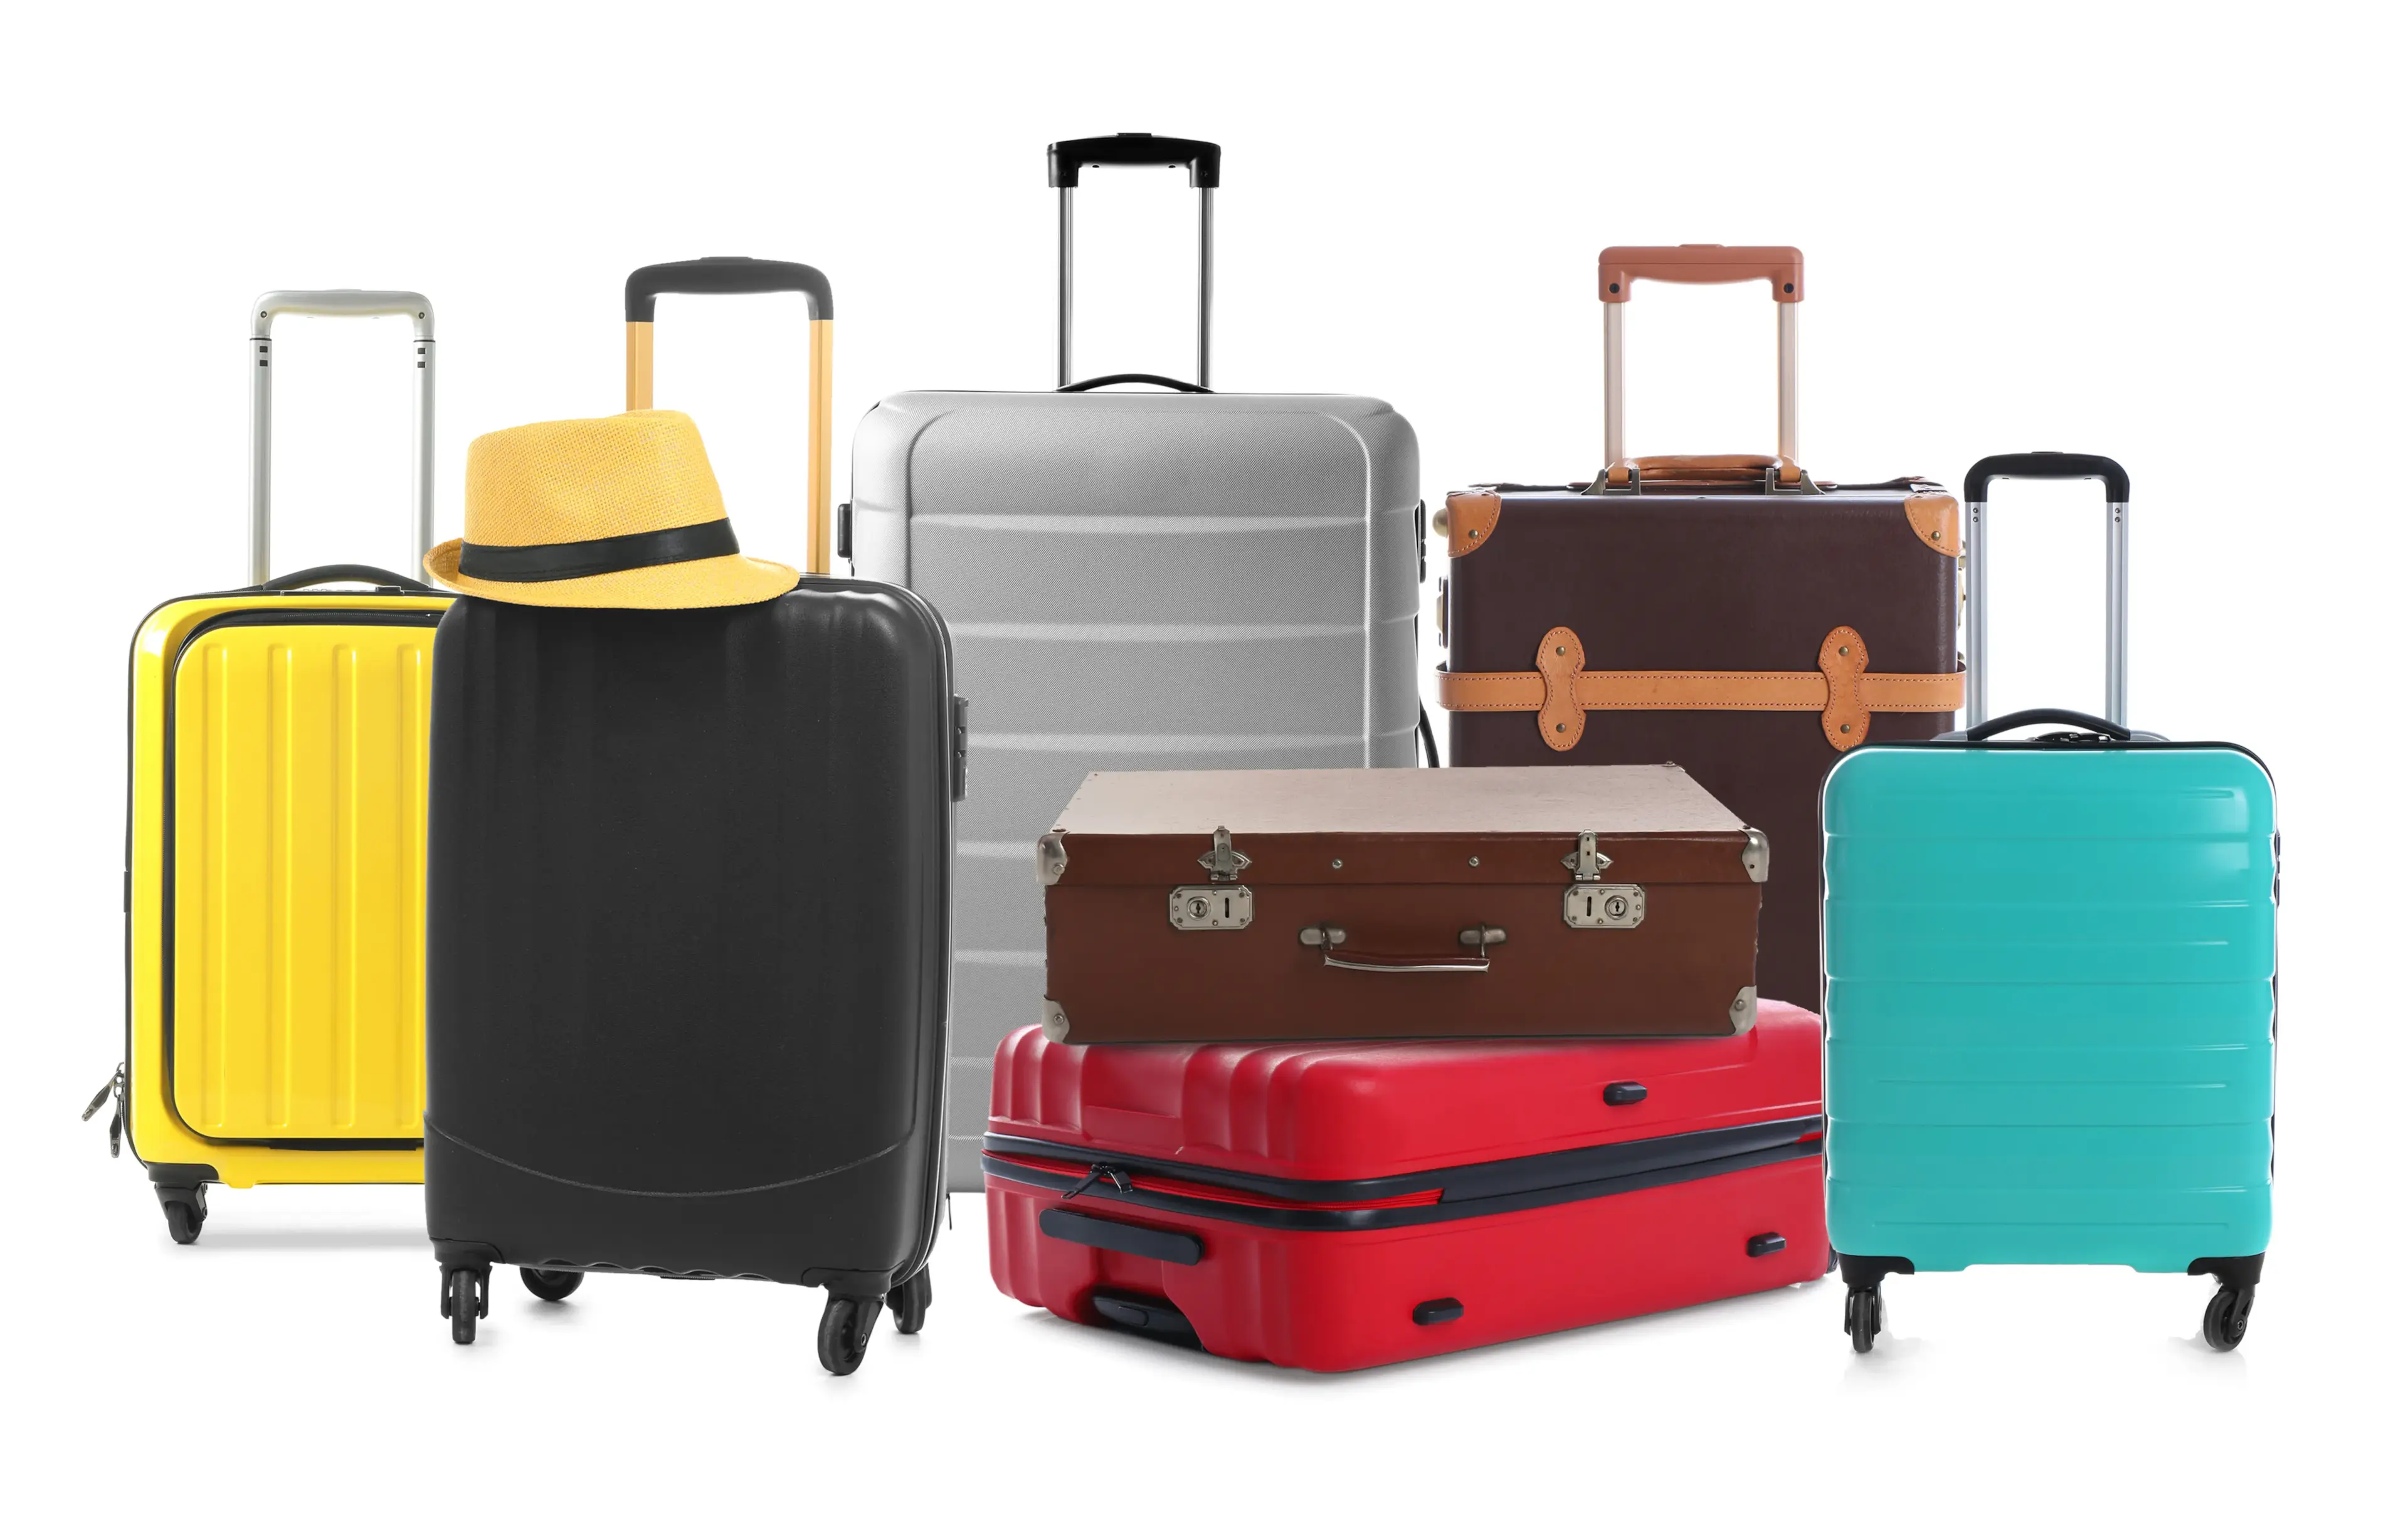 Where to Find the Best Prices on Luggage